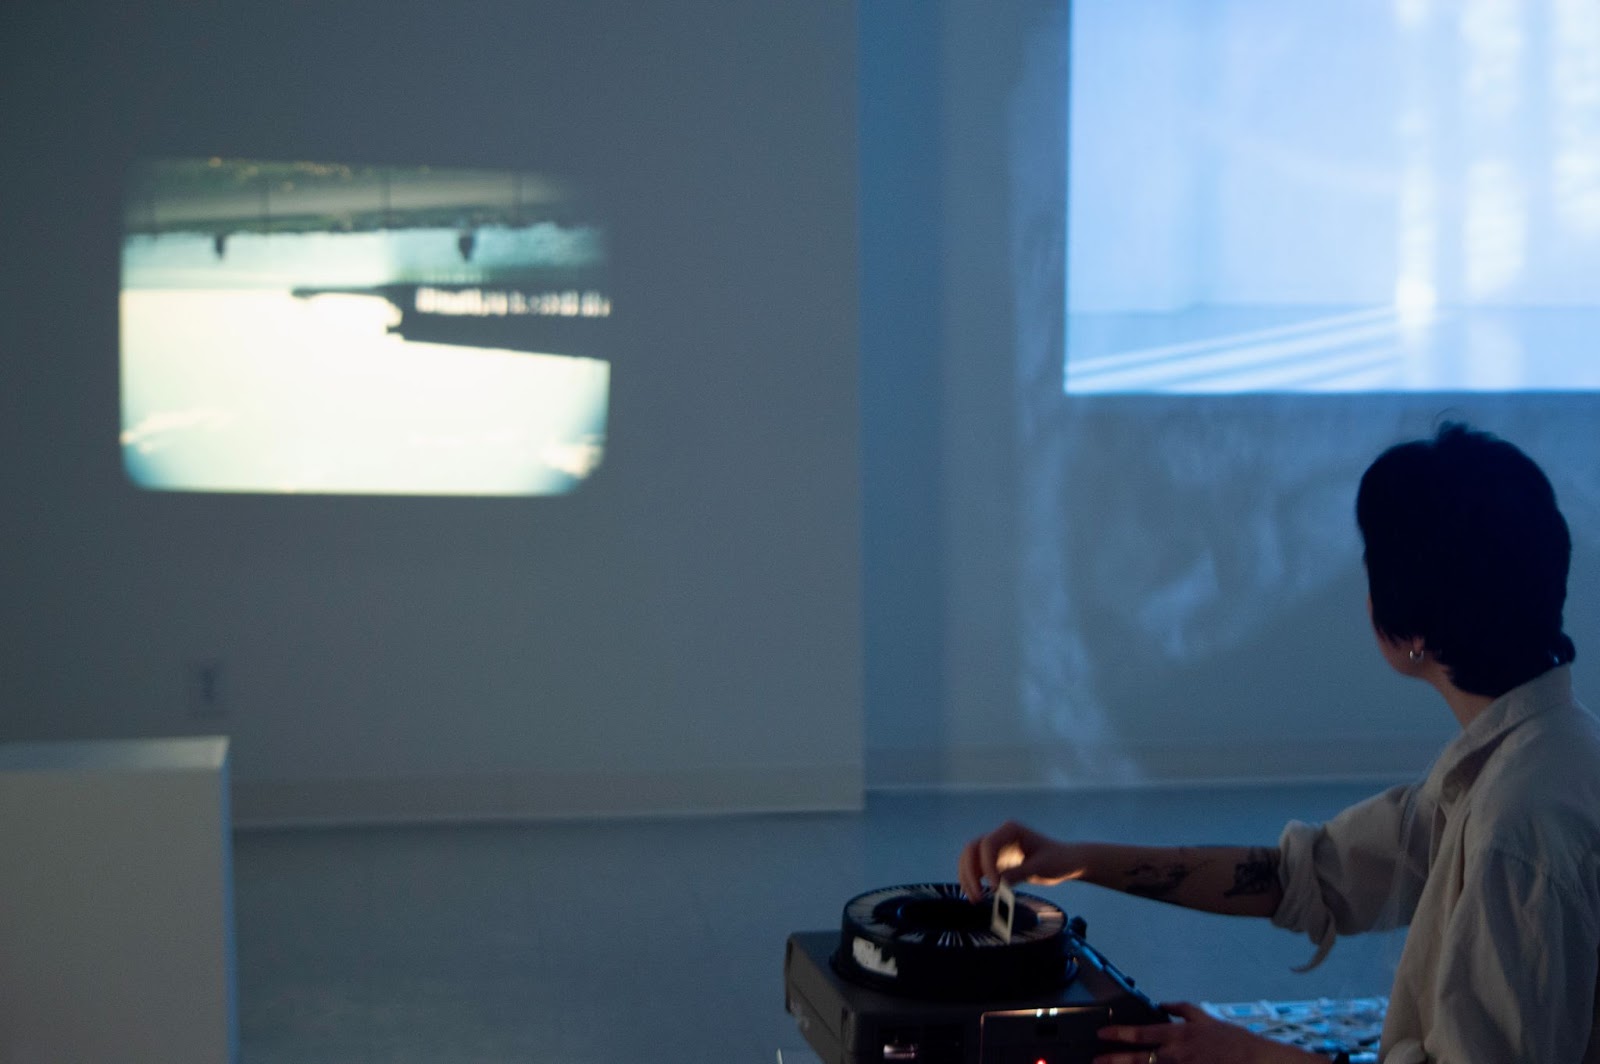 Image: A still of the closing performance for Ruby Que’s Consider a Disappearance. An image of an upside-down shoreline is projected onto a white wall. A light blue, still image of a video work is visible on the right side of the image. A figure crouches in the bottom right corner, inserting photo slides into a projector. Photo by Ethan Vergara